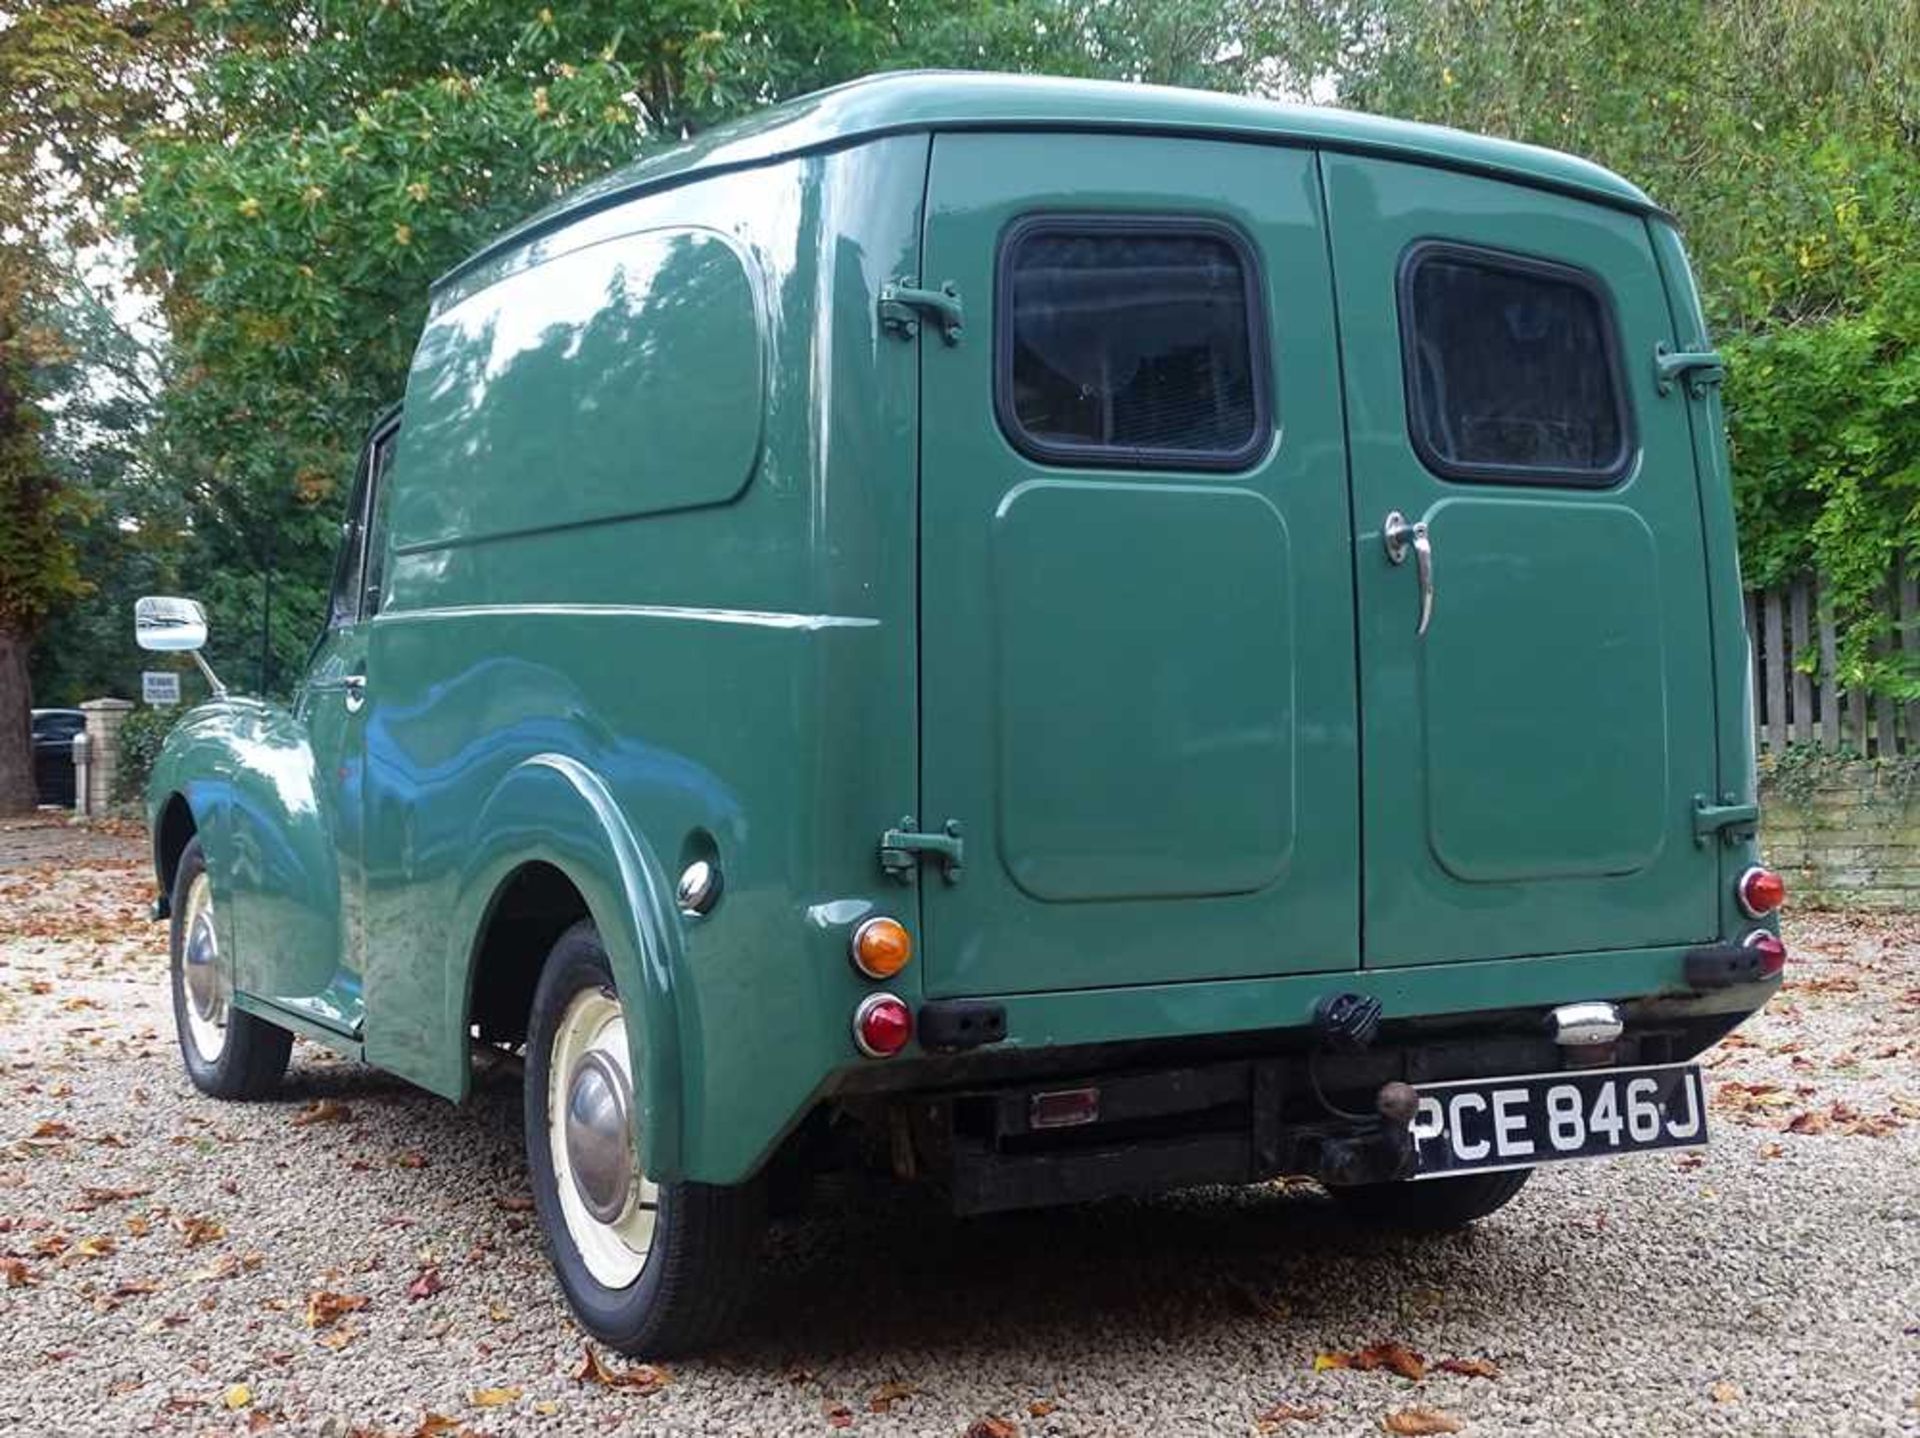 1970 Austin 6 CWT Van Single Family Ownership From New - Image 11 of 45